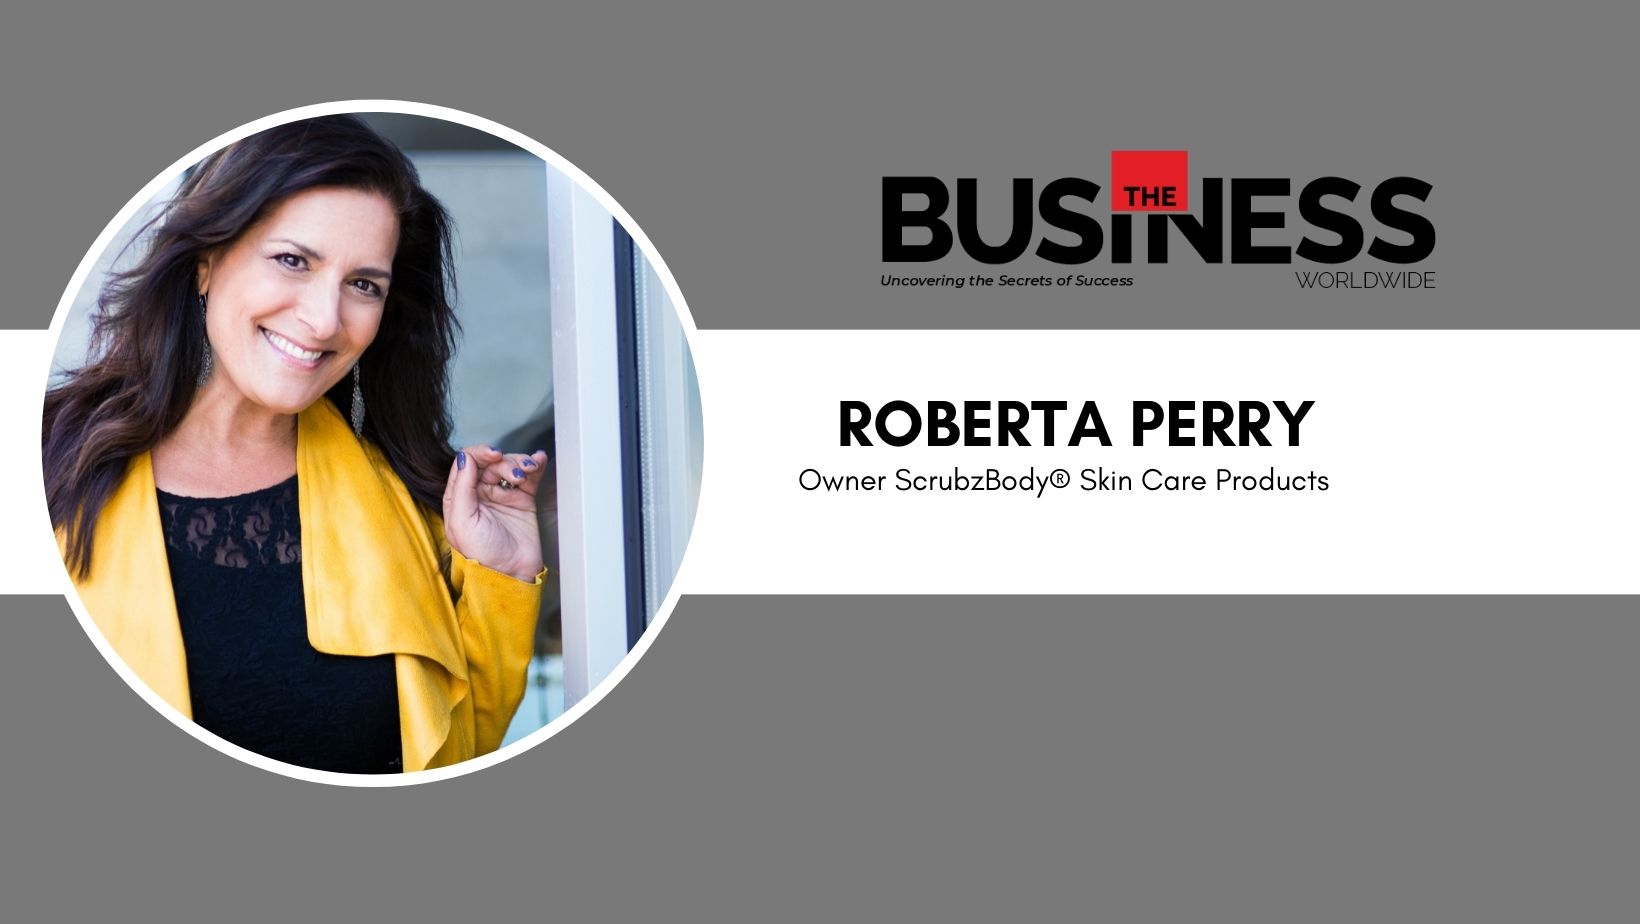 Roberta Perry: Ensuring Simple, Natural, Efficient Care for Every Skin